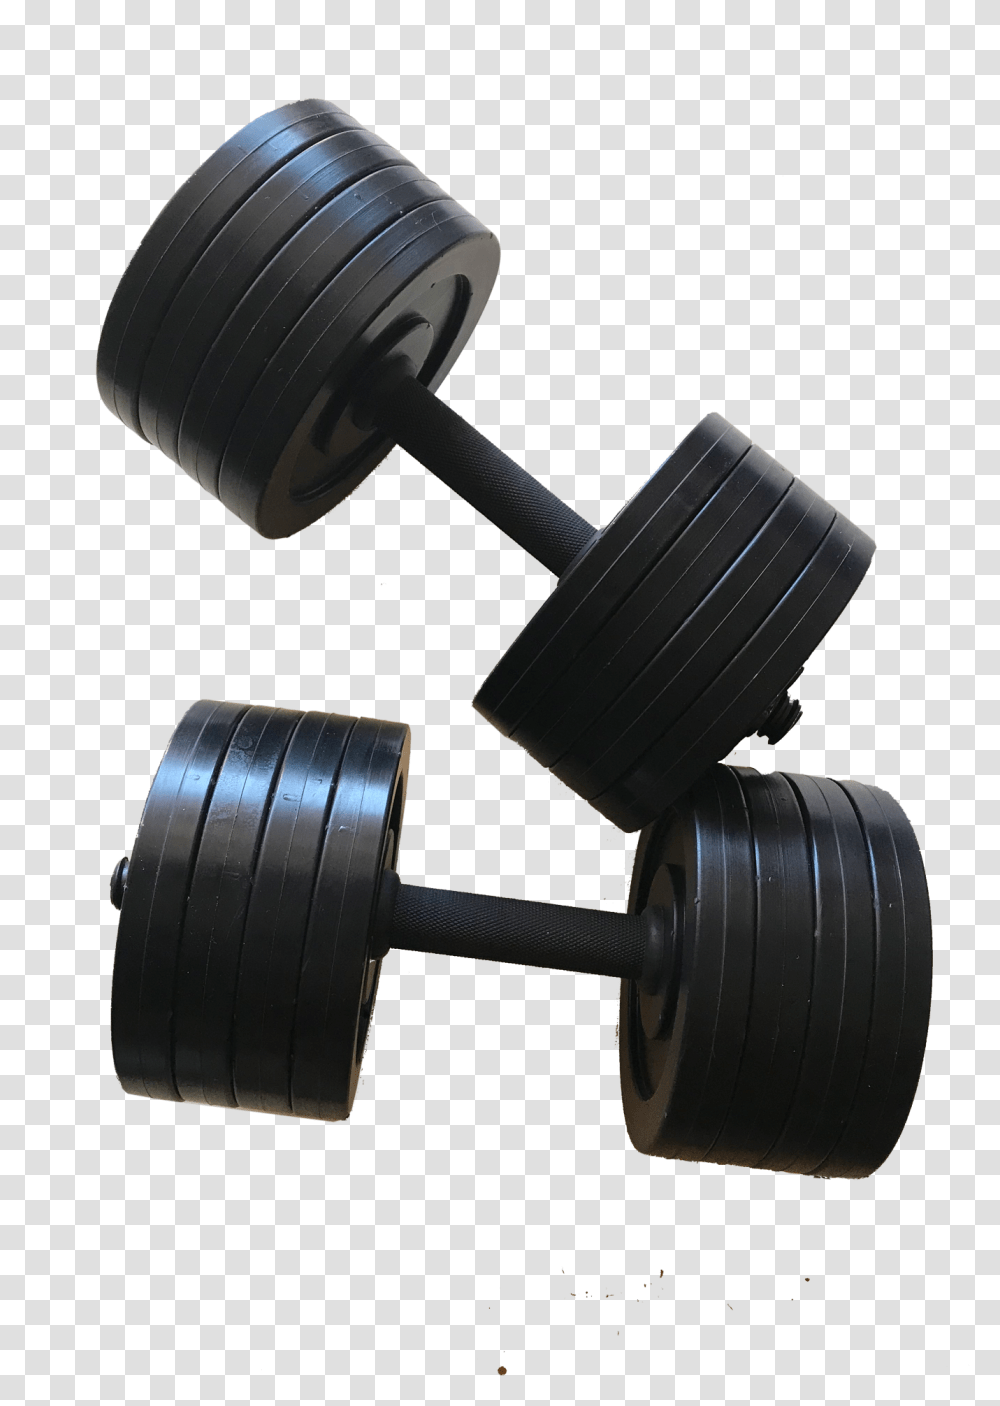 Fake Weights Buy Fake Weights Plastic Weights Prop, Hammer, Tool ...